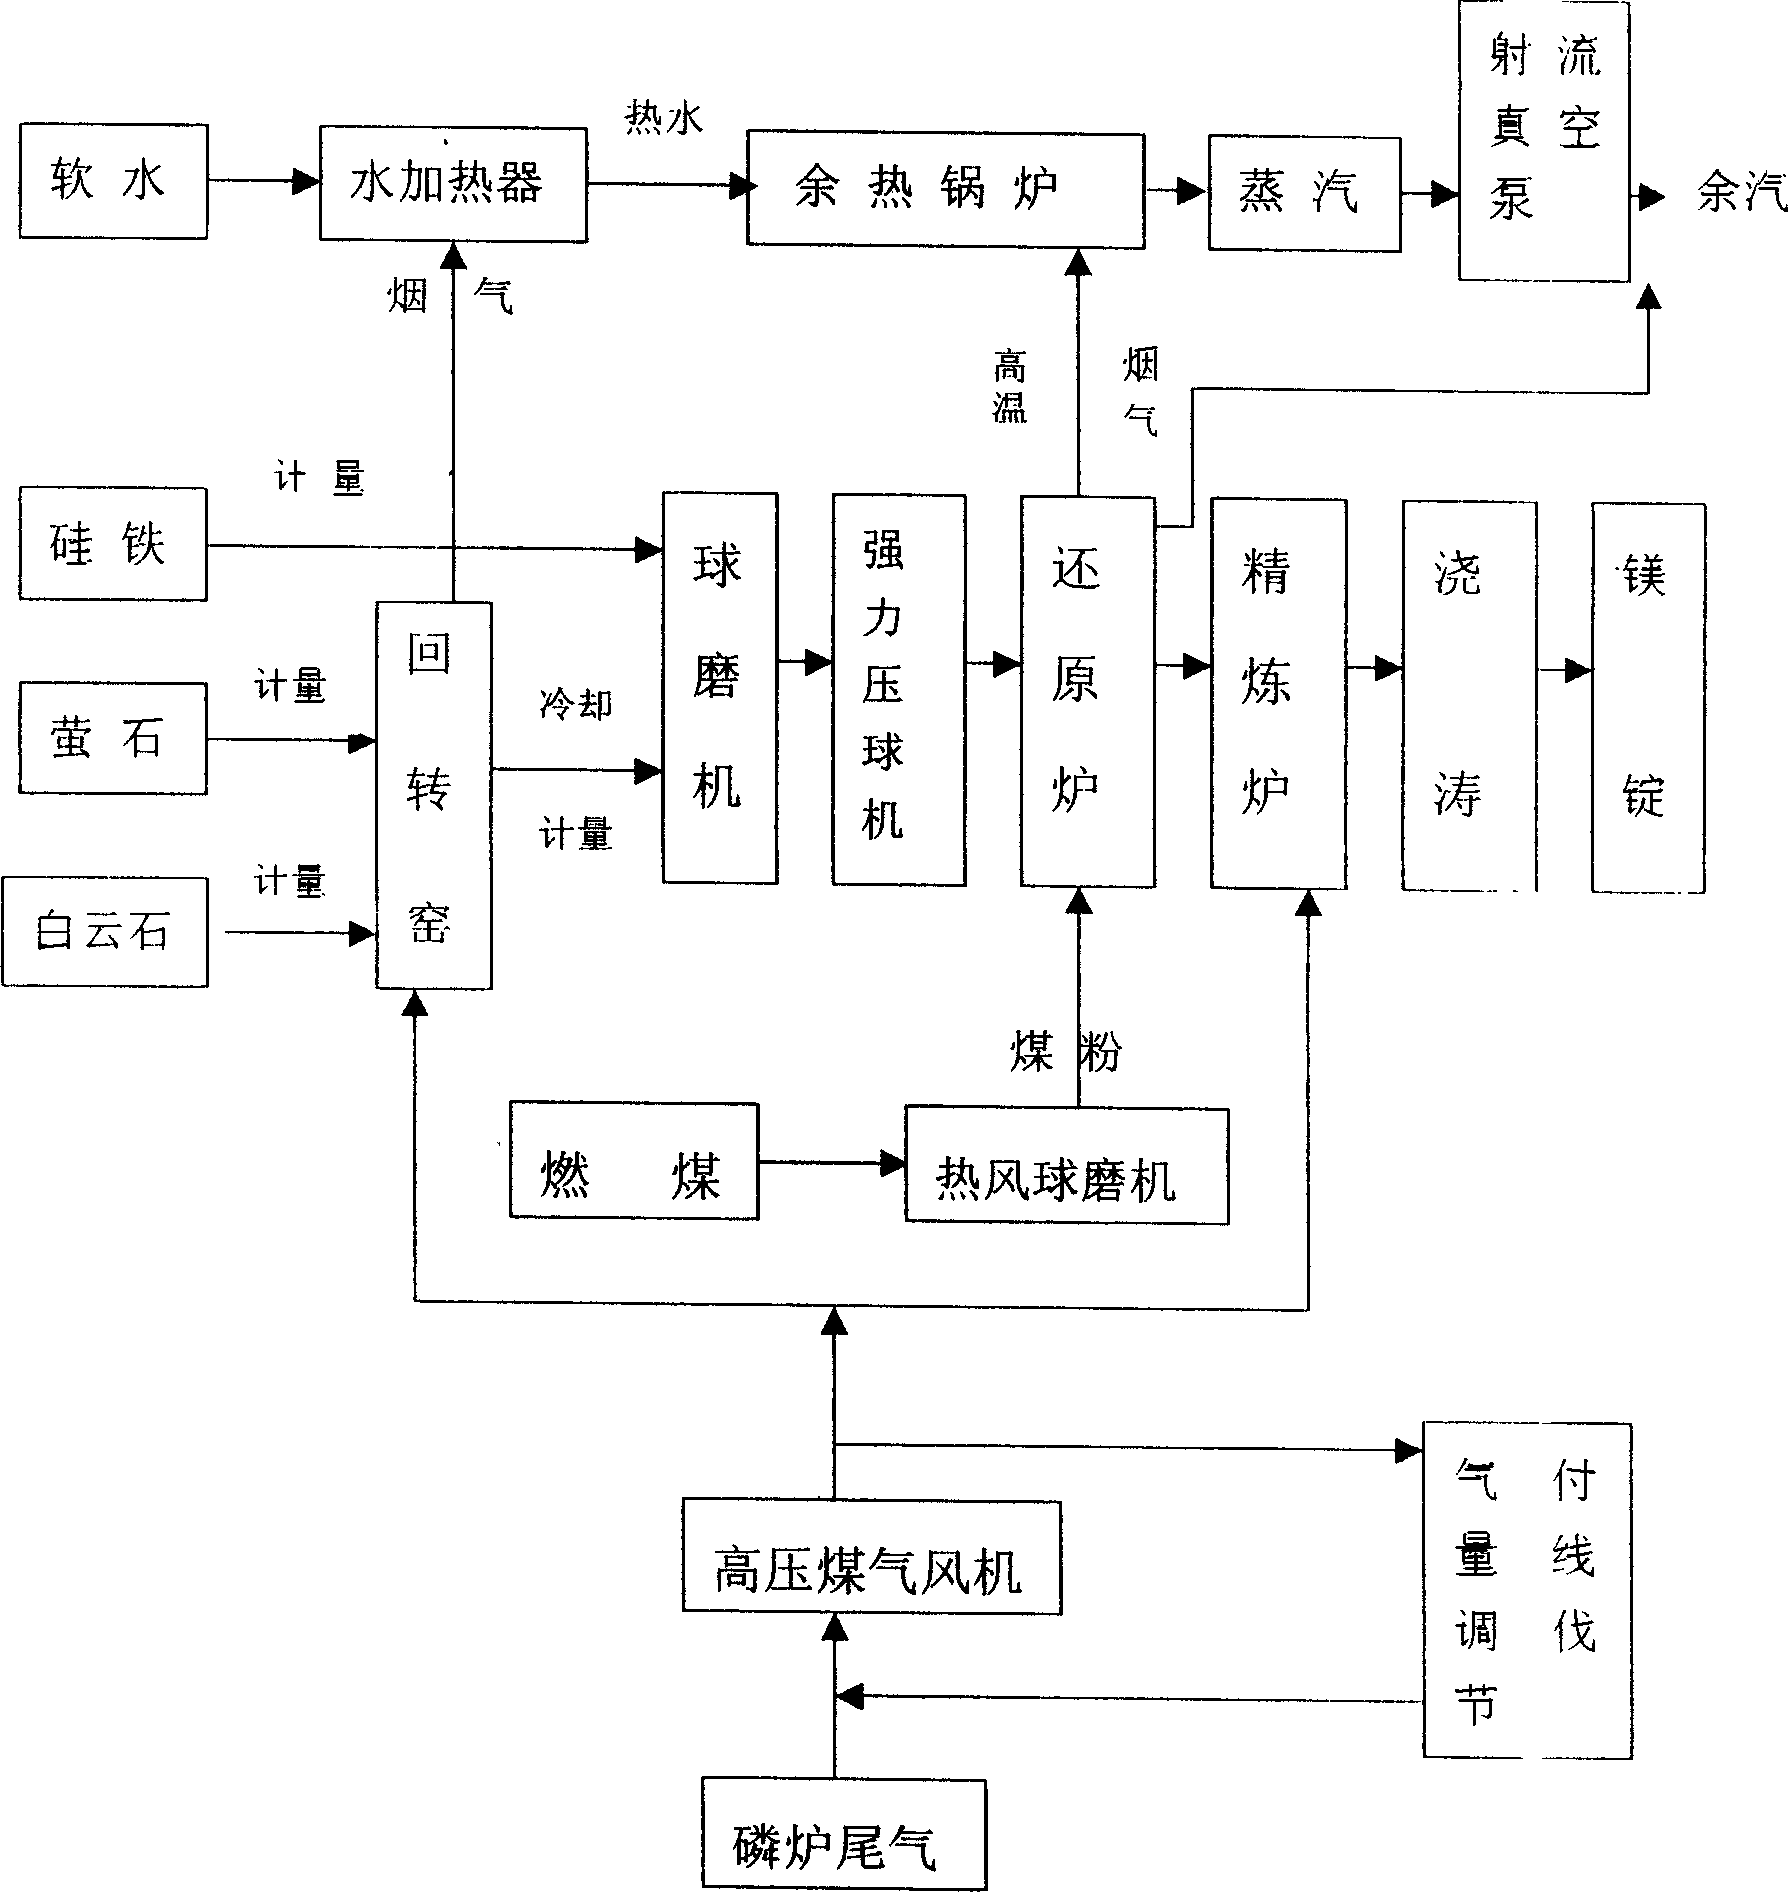 Process for producing metal magnesium by phosphorus furnace tail gas